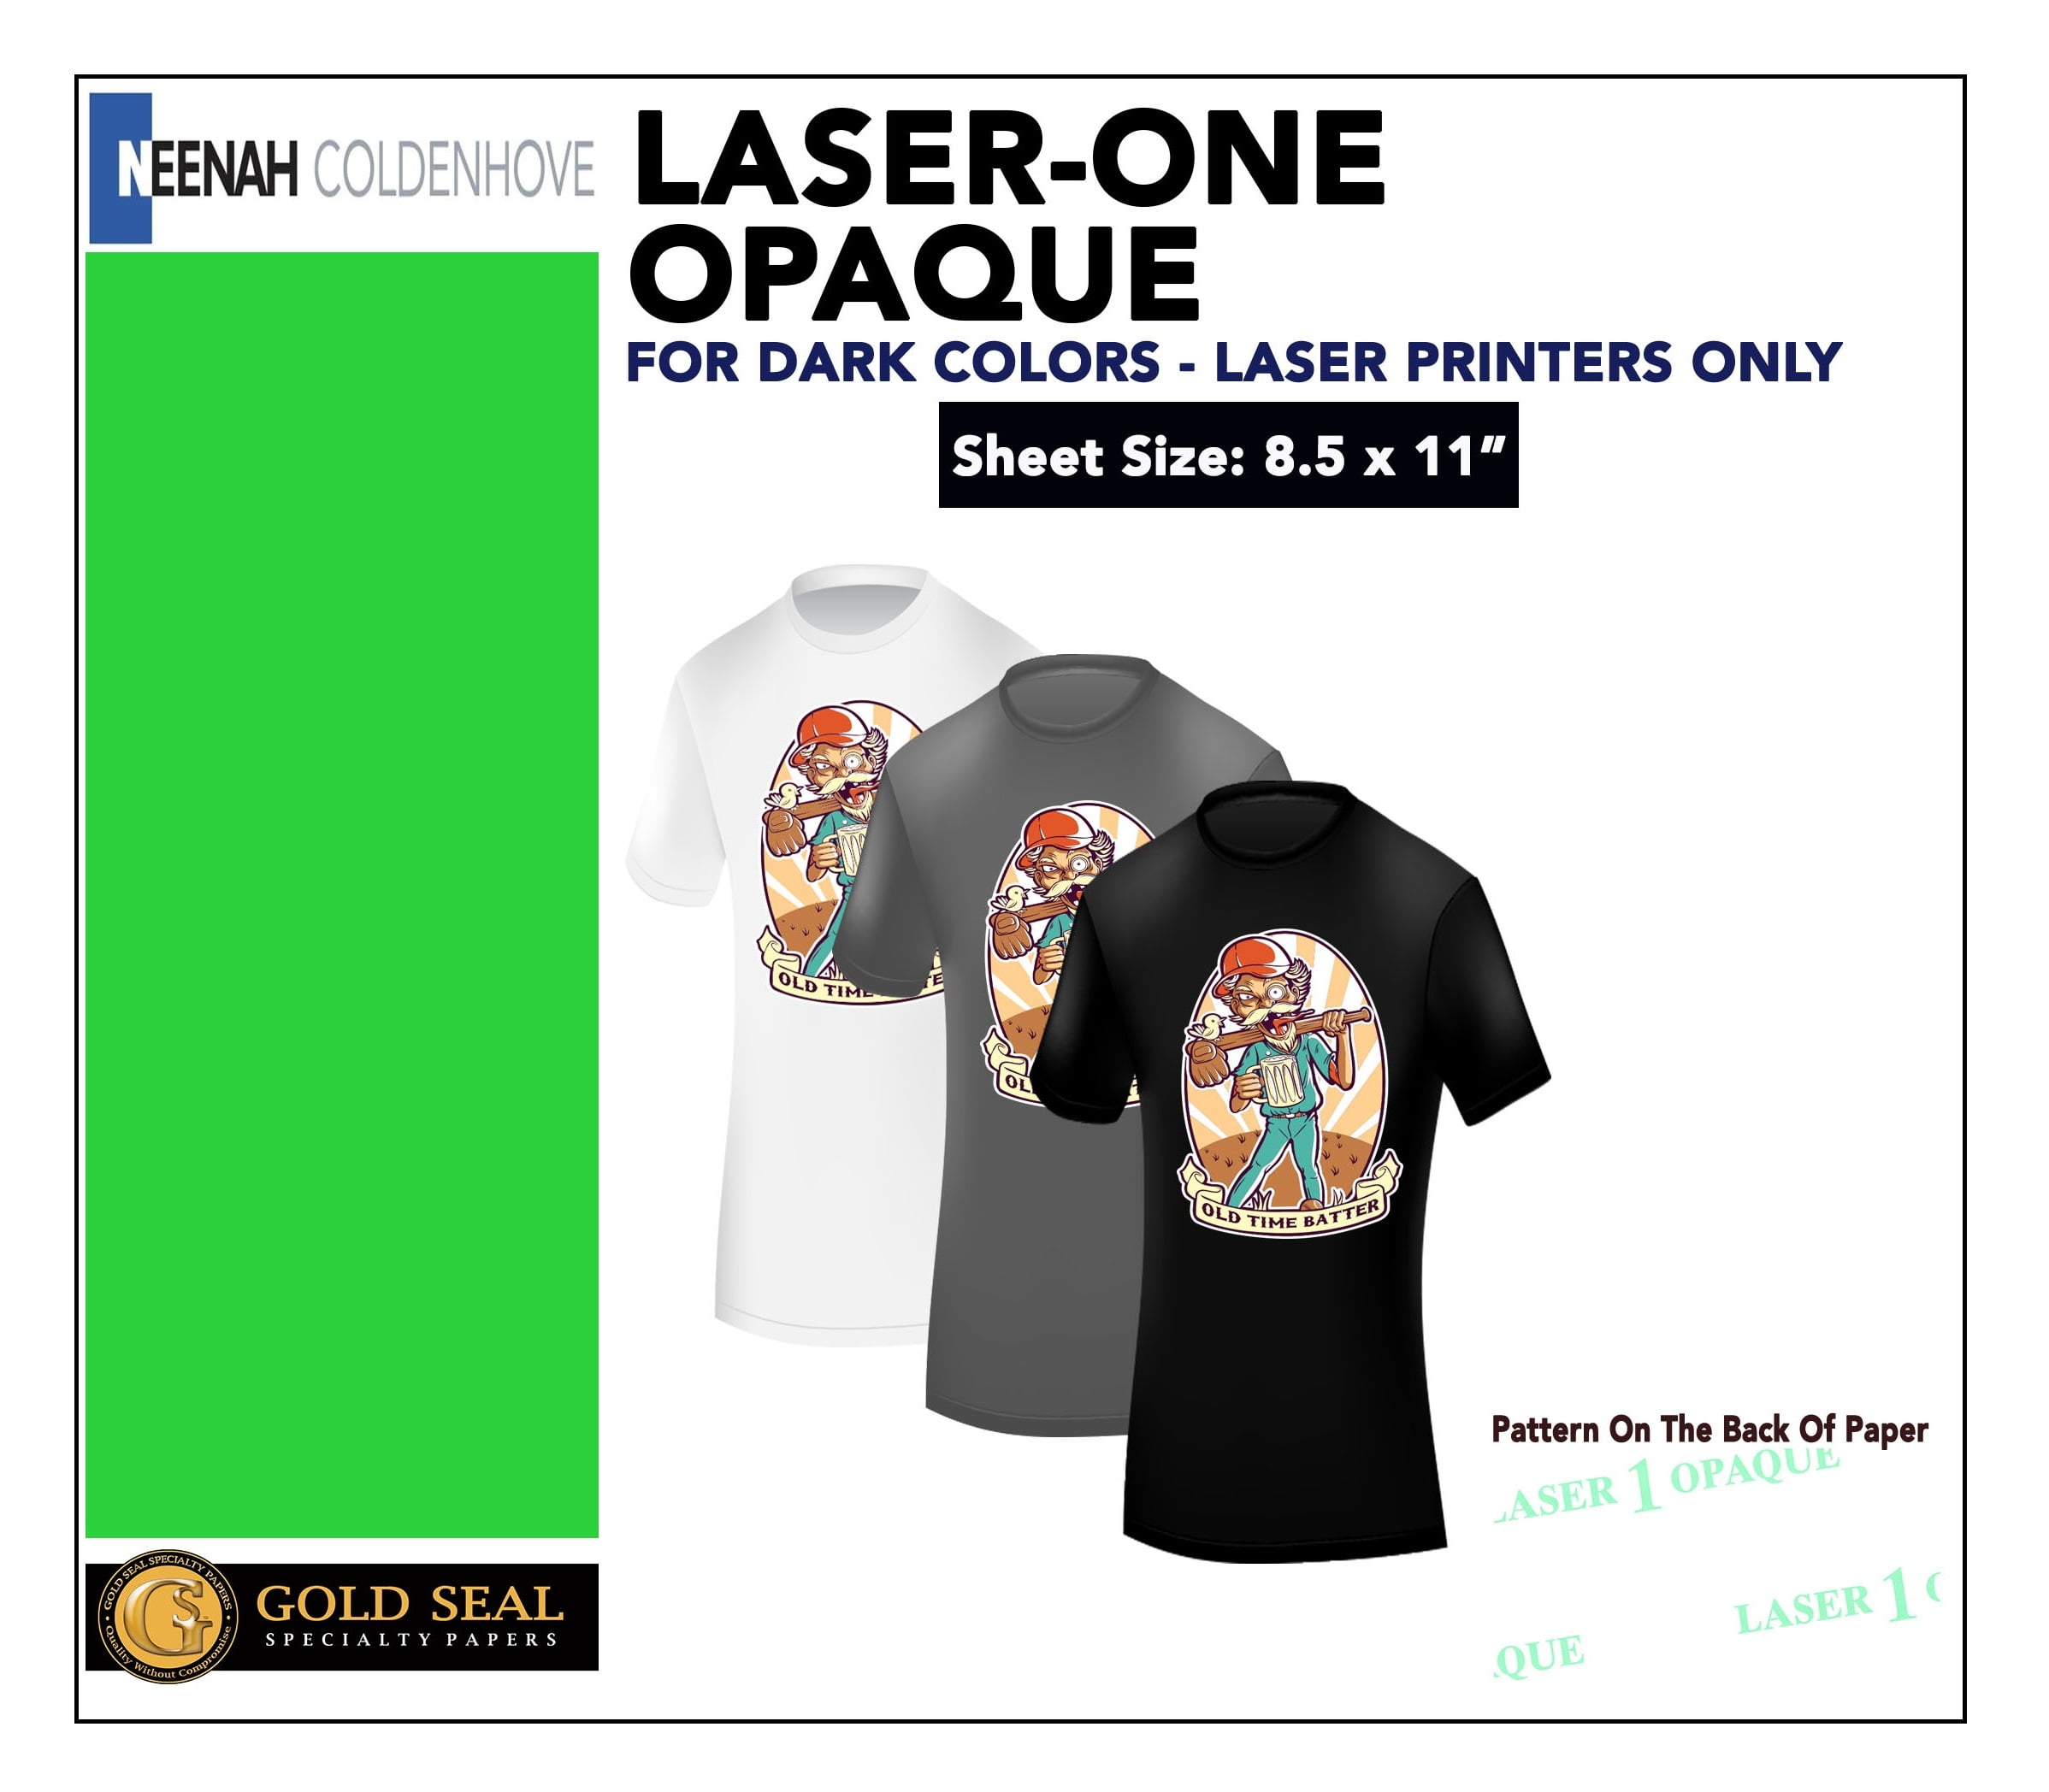 NEENAH "LASER 1 OPAQUE" 25 CT A3 SIZE LASER TRANSFER PAPER FOR DARK FABRIC 